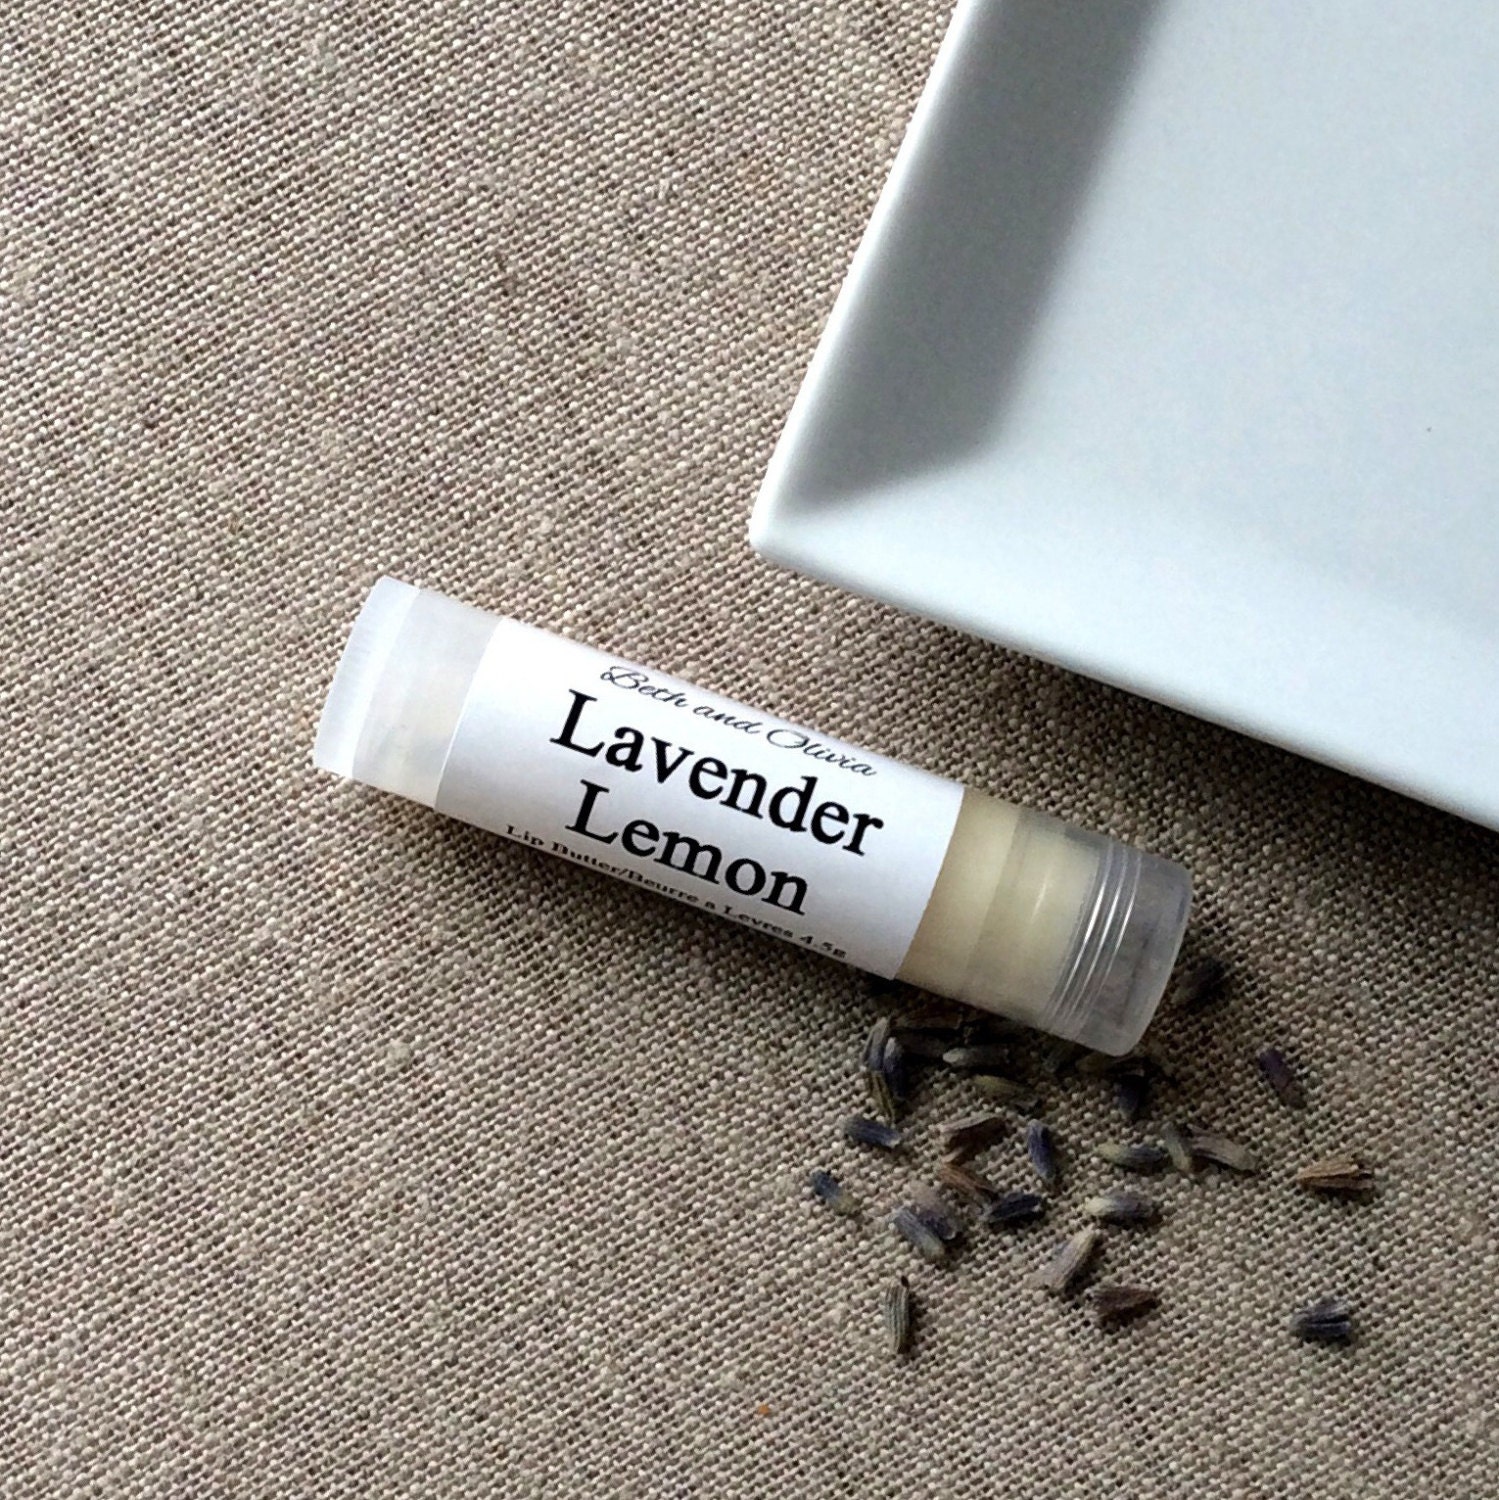 Lavender Lemon lip butter, lavender lemon lip balm, Gifts for teens, lip balm, lemon lip balm, wedding favors, gifts for her,